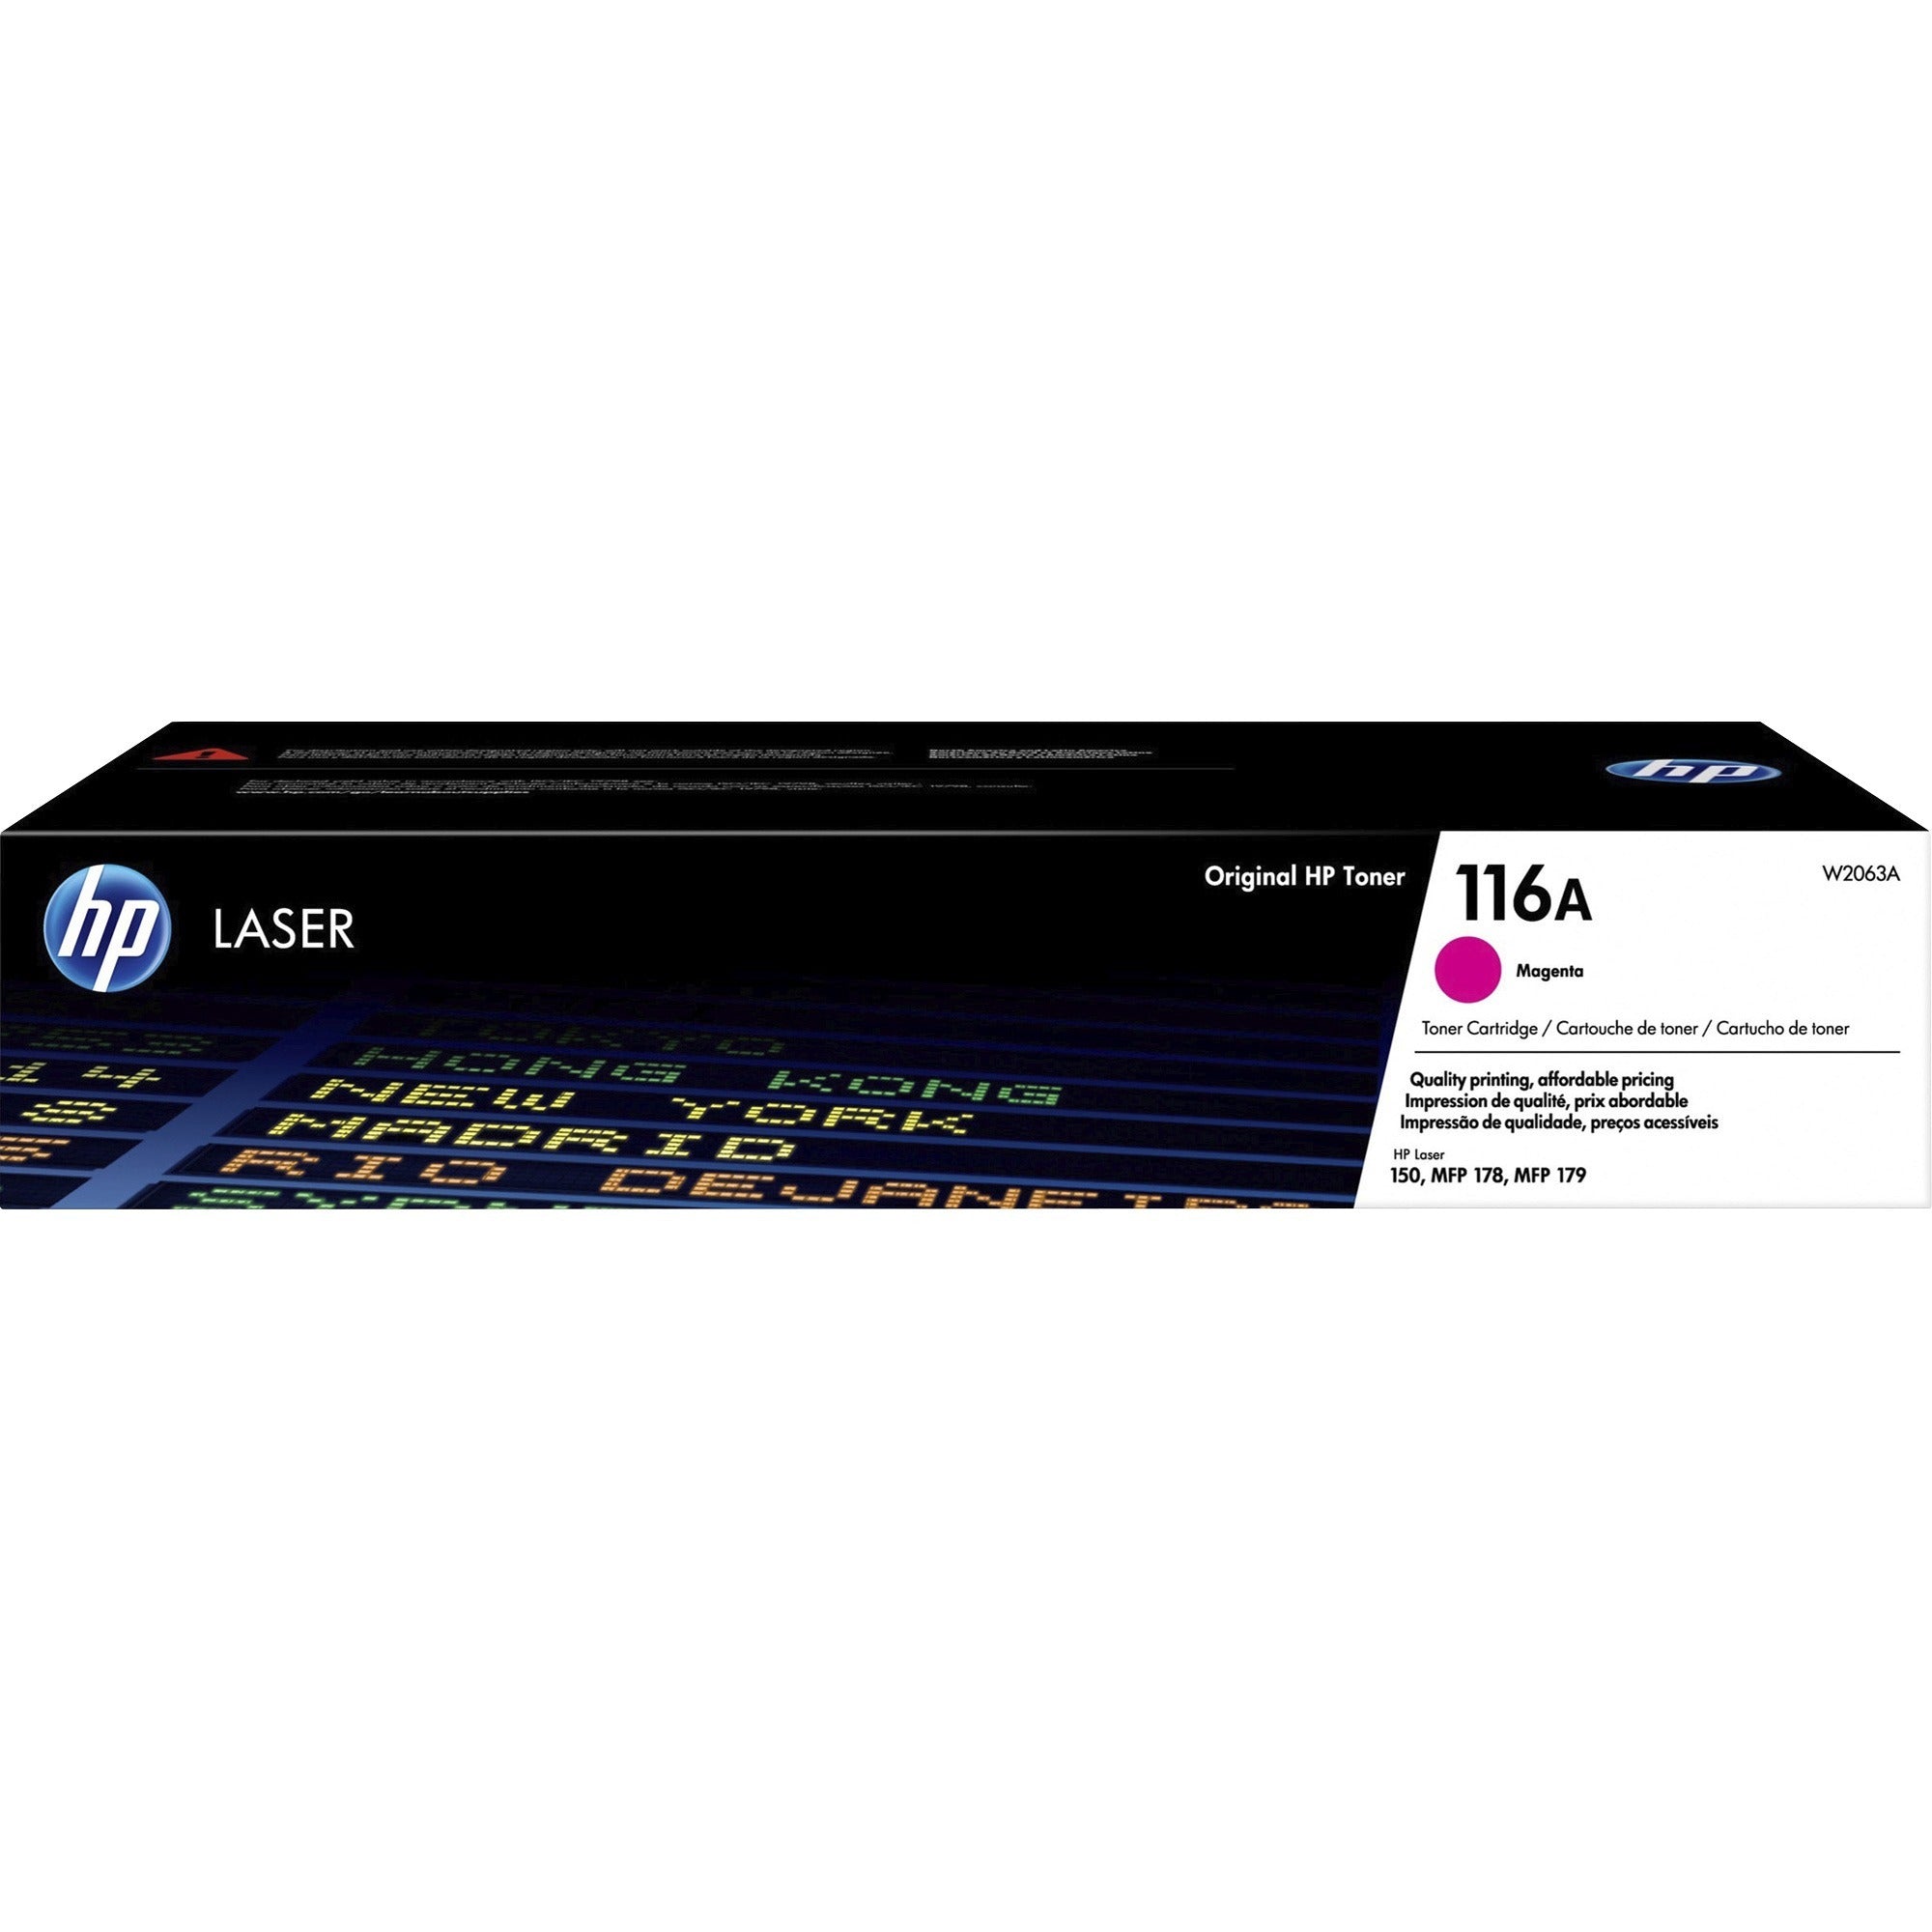 hp-116a-w2063a-original-laser-toner-cartridge-magenta-1-each-700-pages_heww2063a - 1